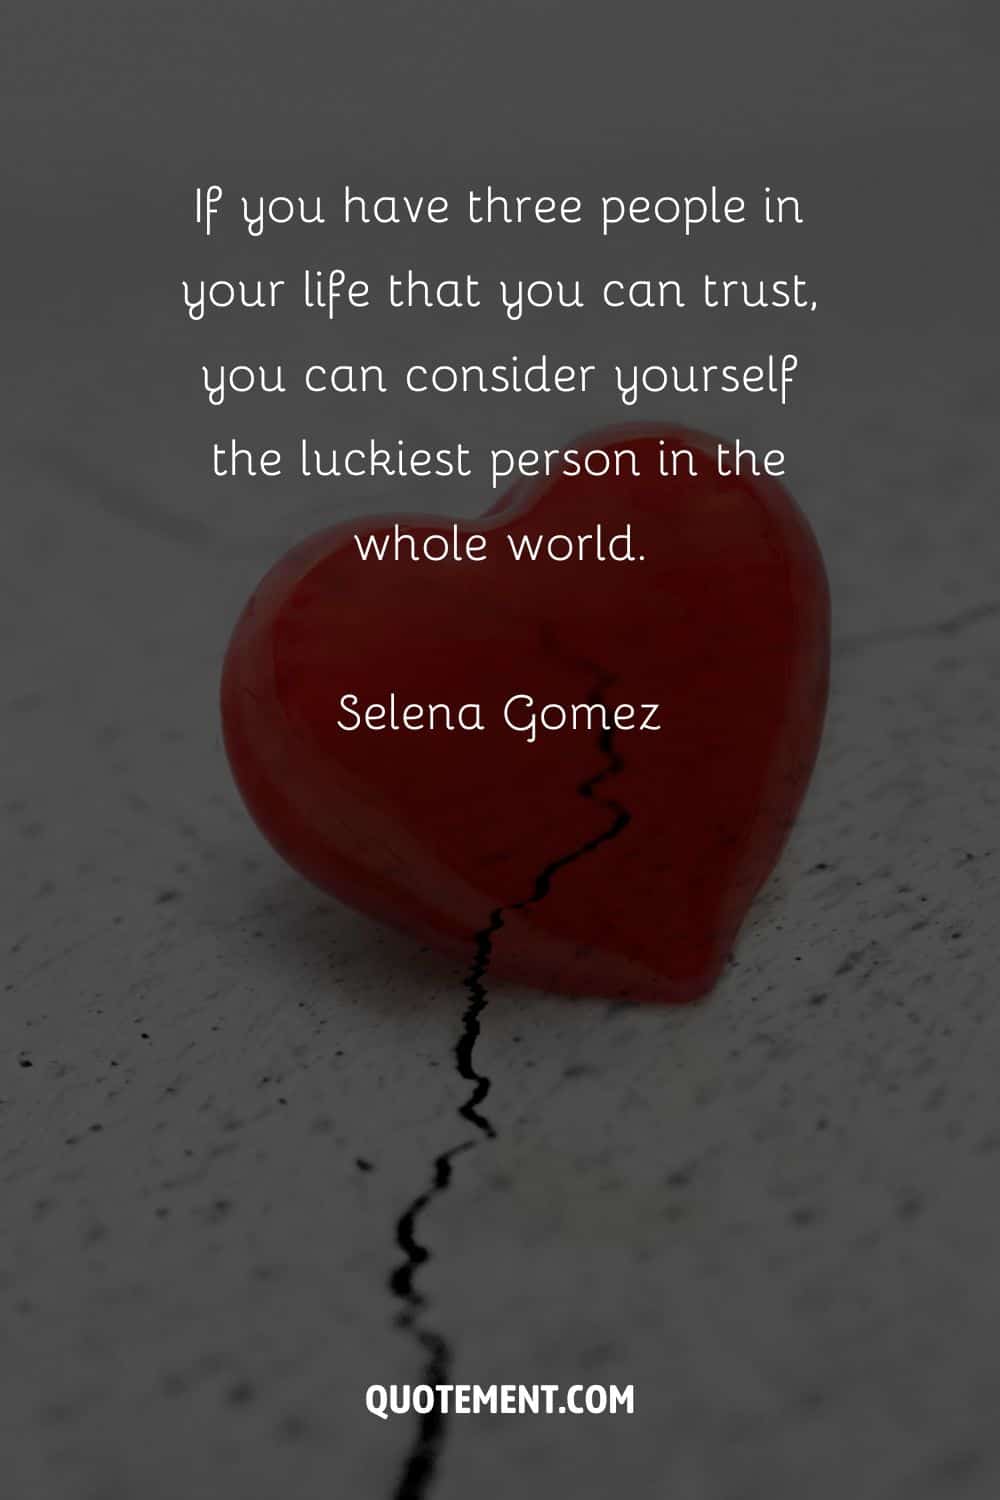 “If you have three people in your life that you can trust, you can consider yourself the luckiest person in the whole world.” — Selena Gomez